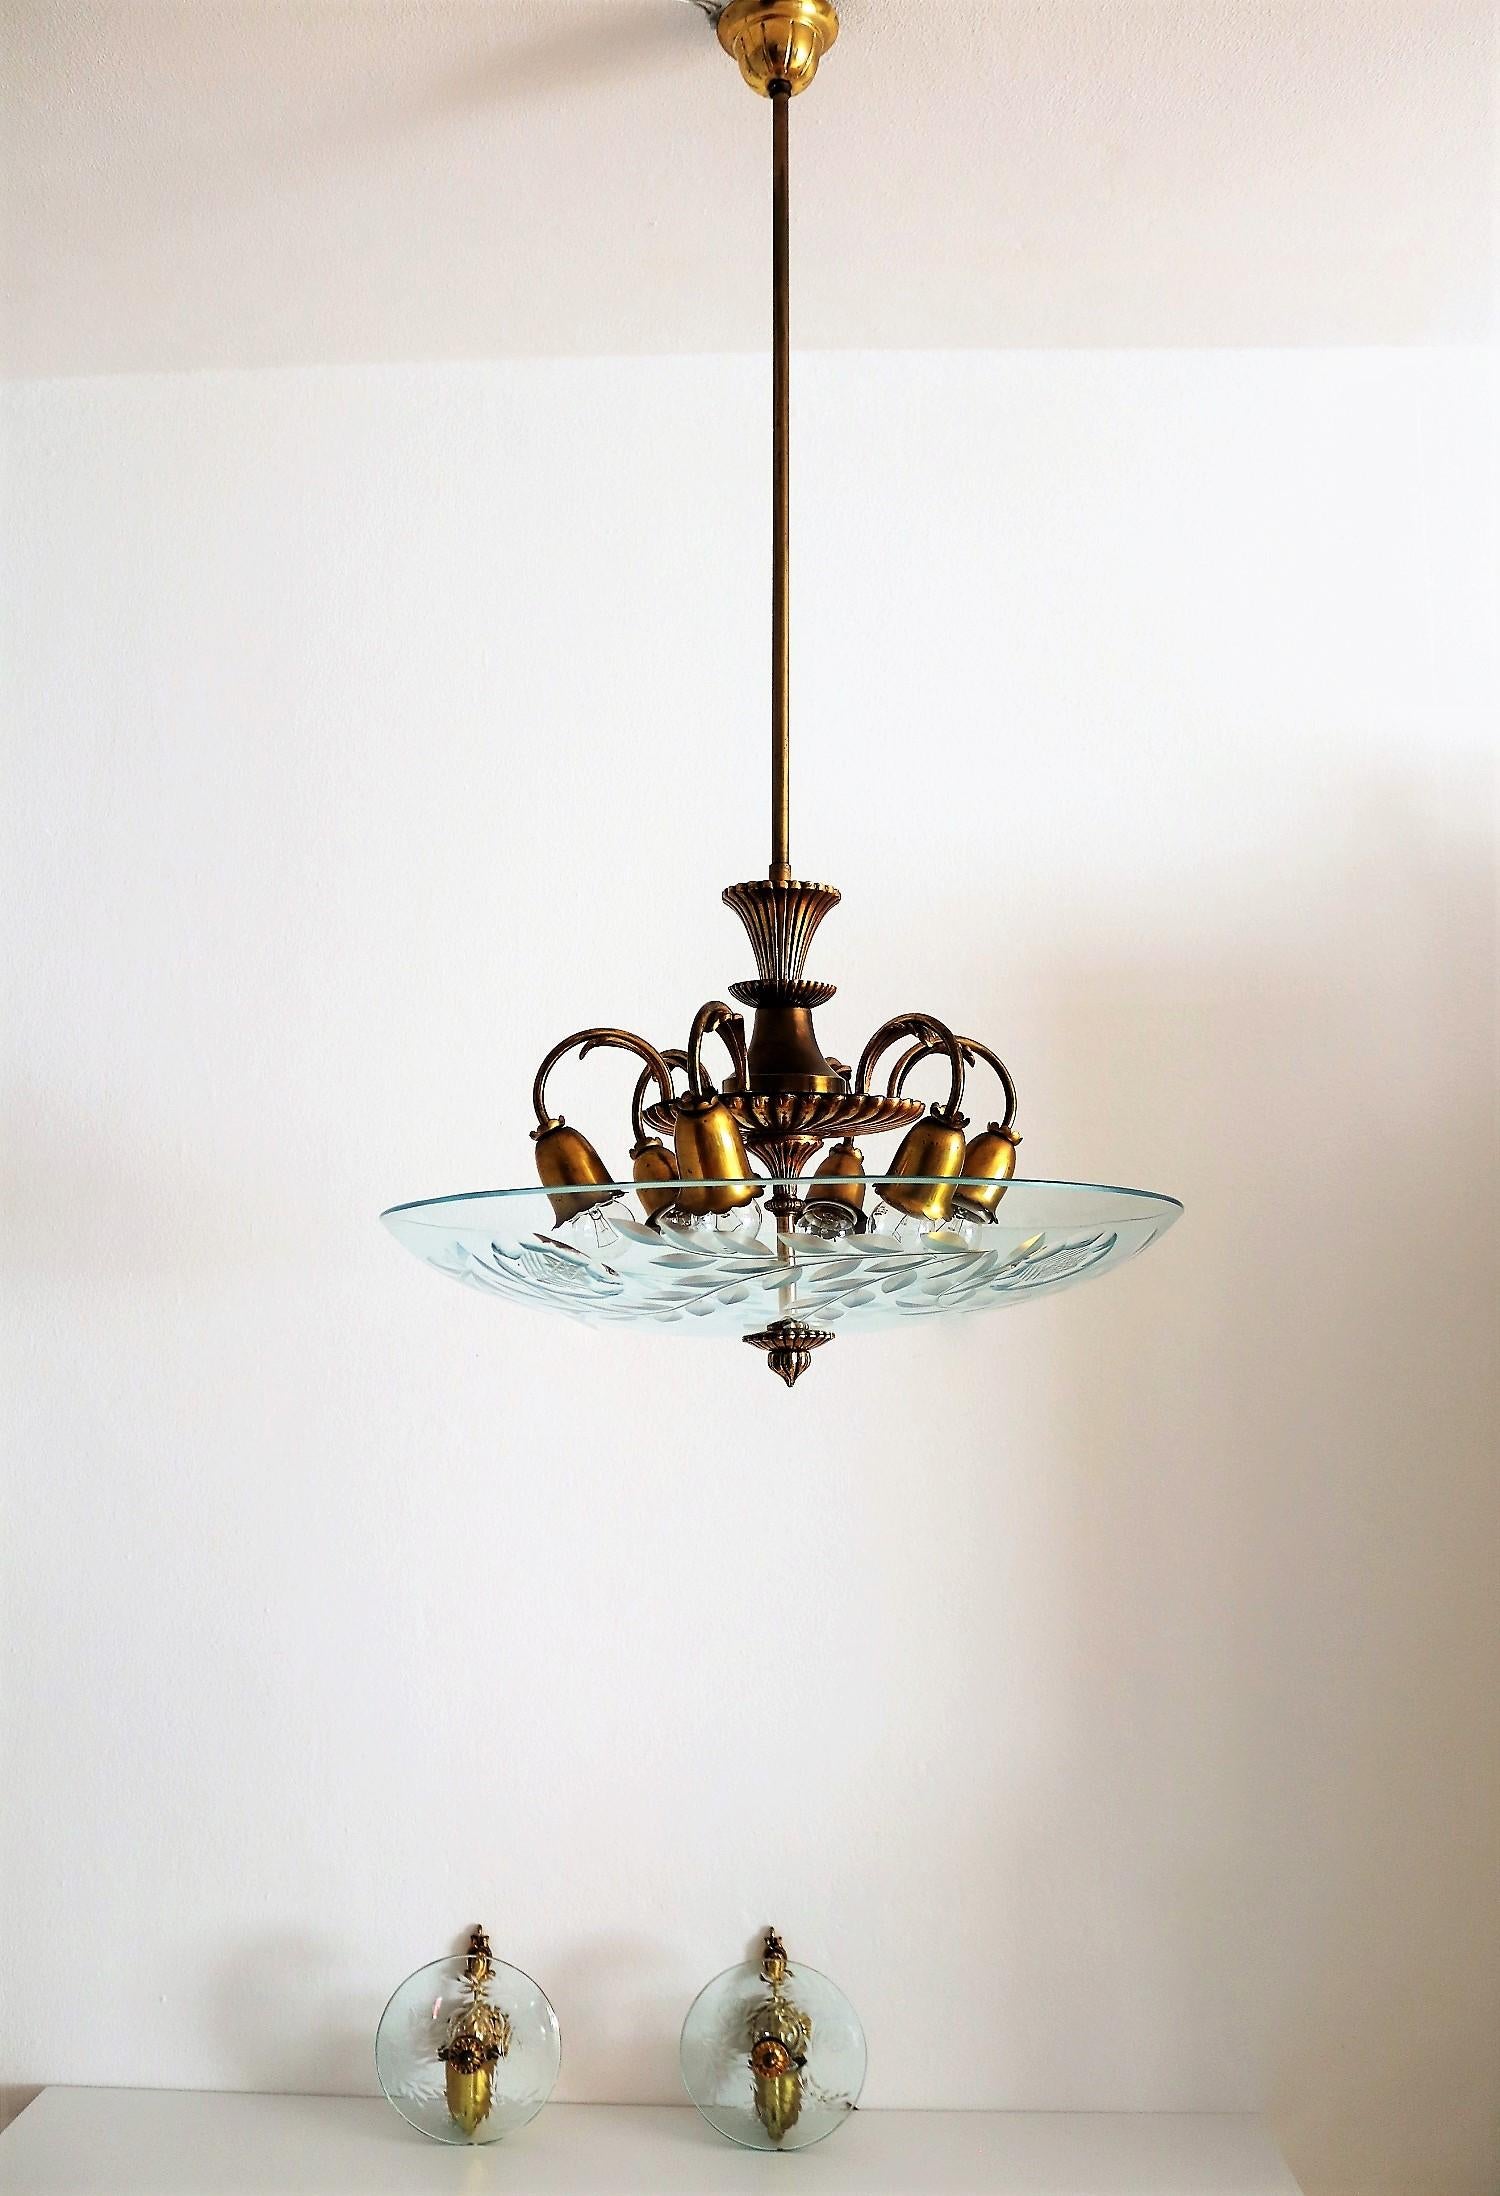 Italian Midcentury Brass and Crystal Glass Chandelier, 1950s For Sale 14